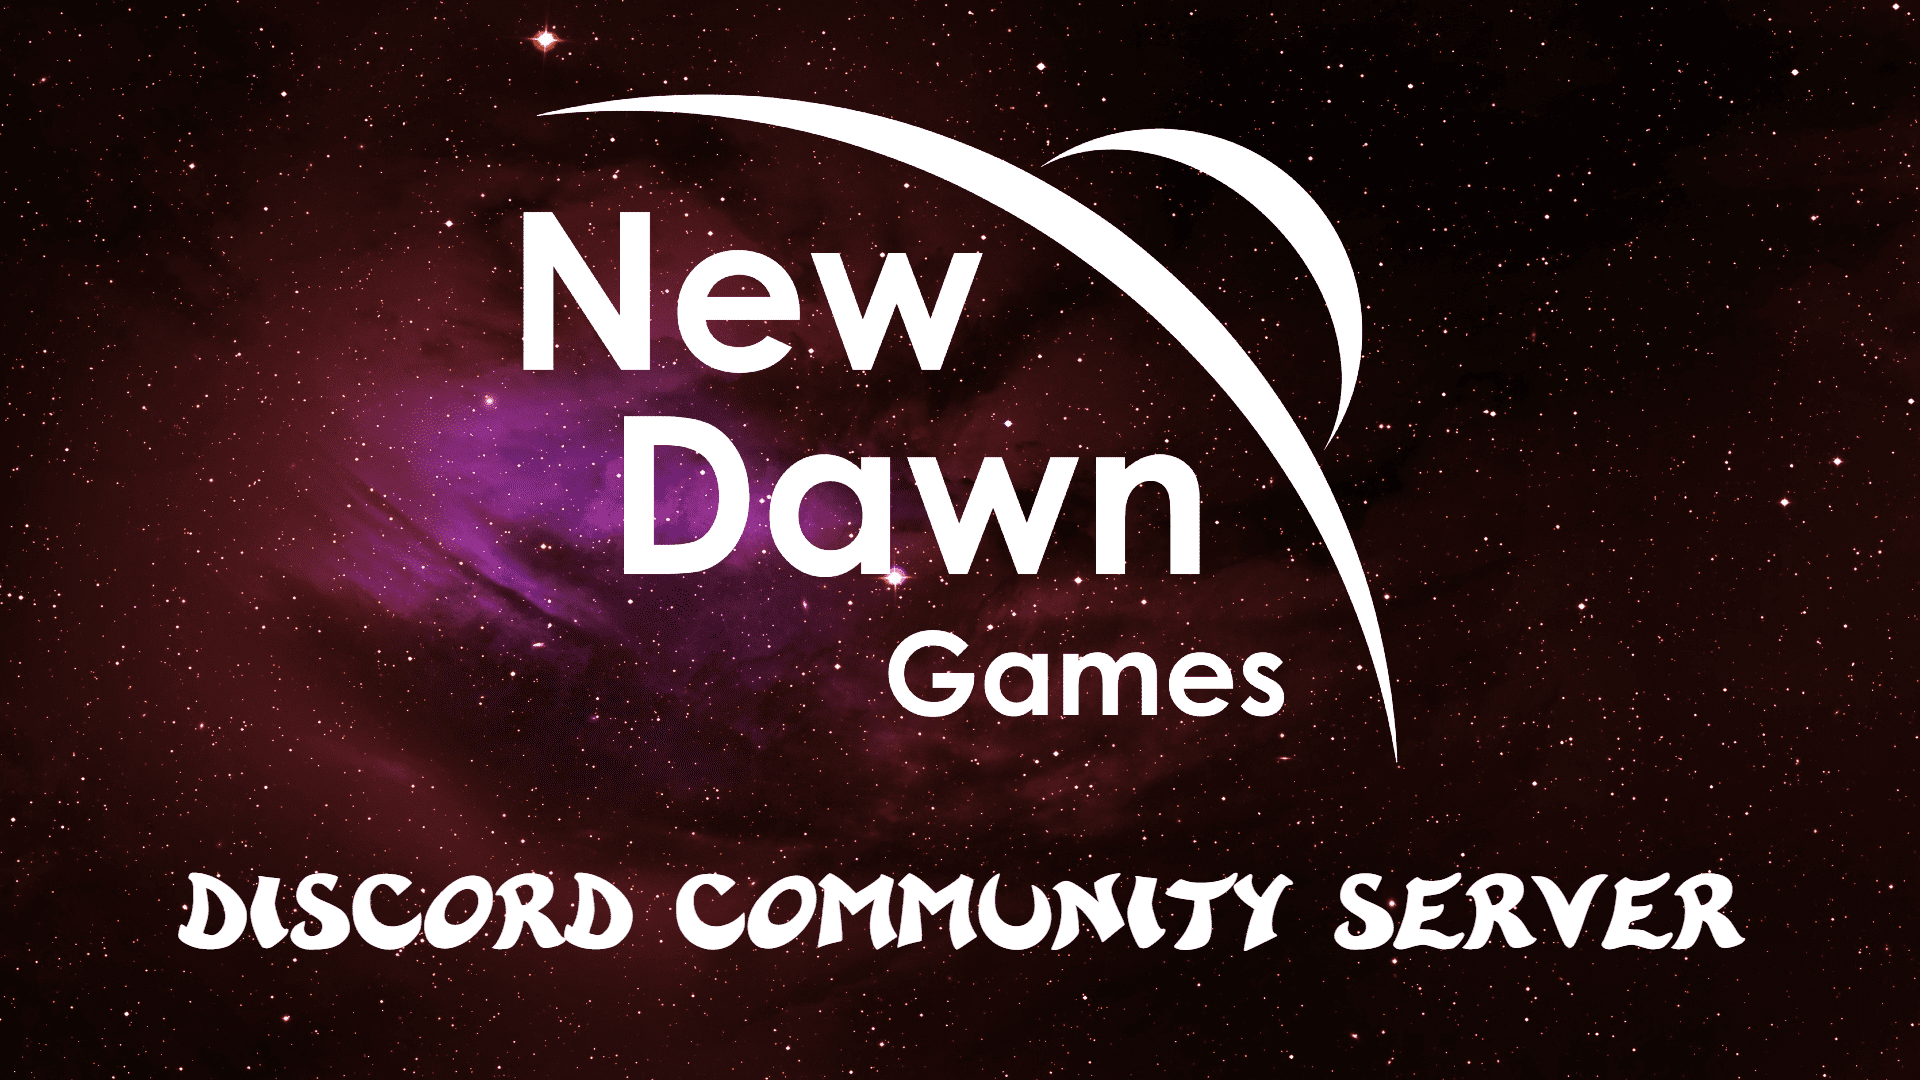 Our official Discord Community Server is open!